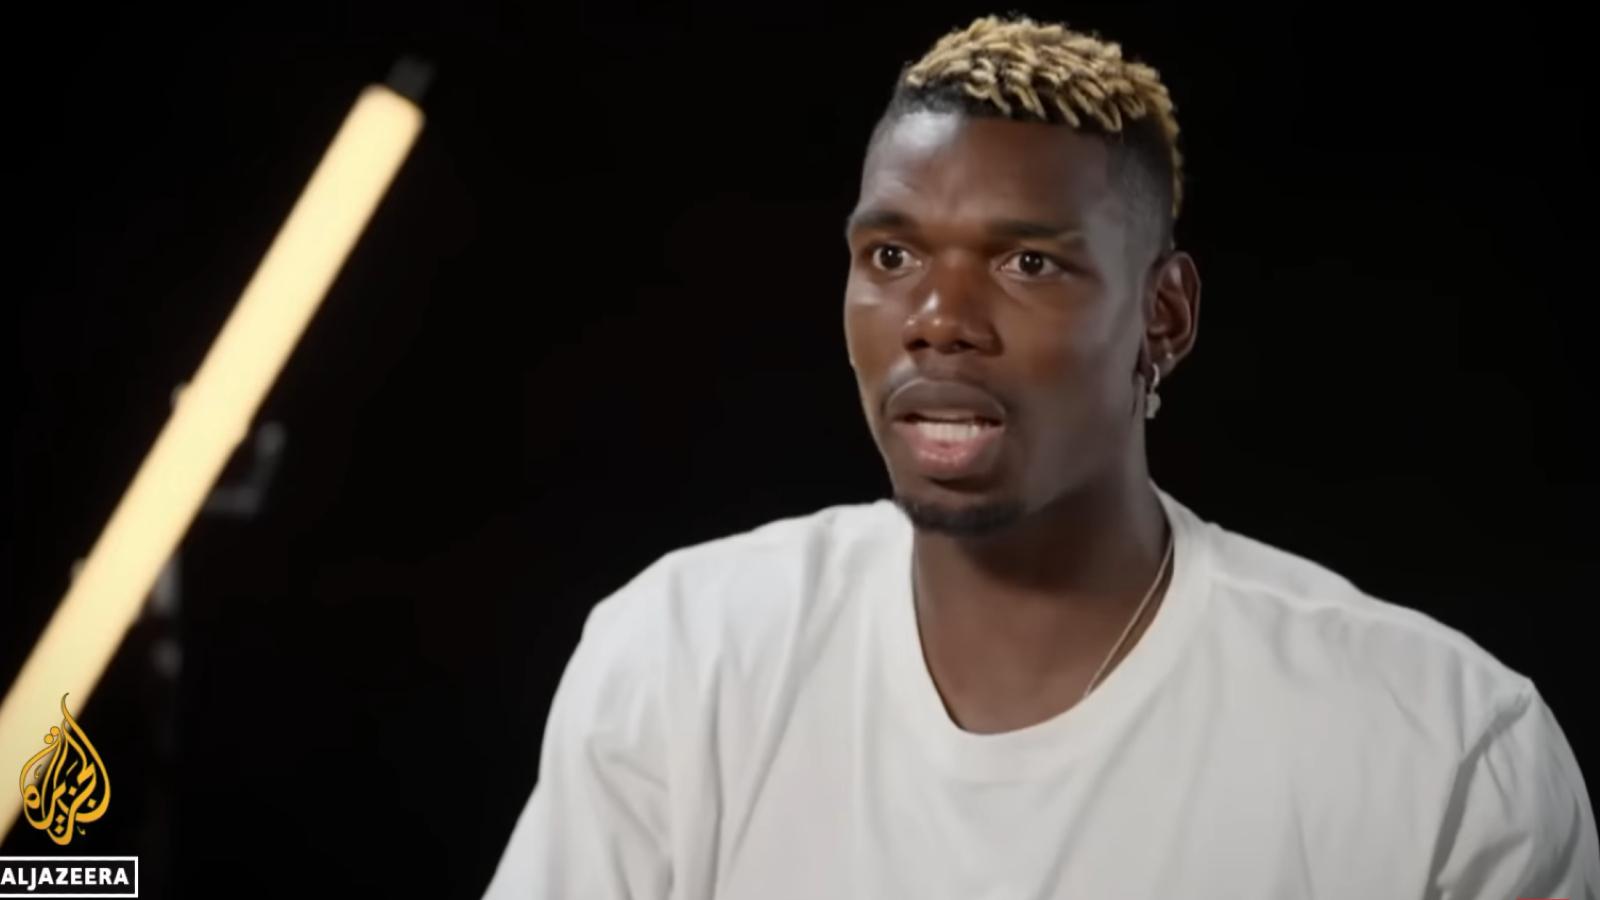 Pogba has been handed a huge suspension